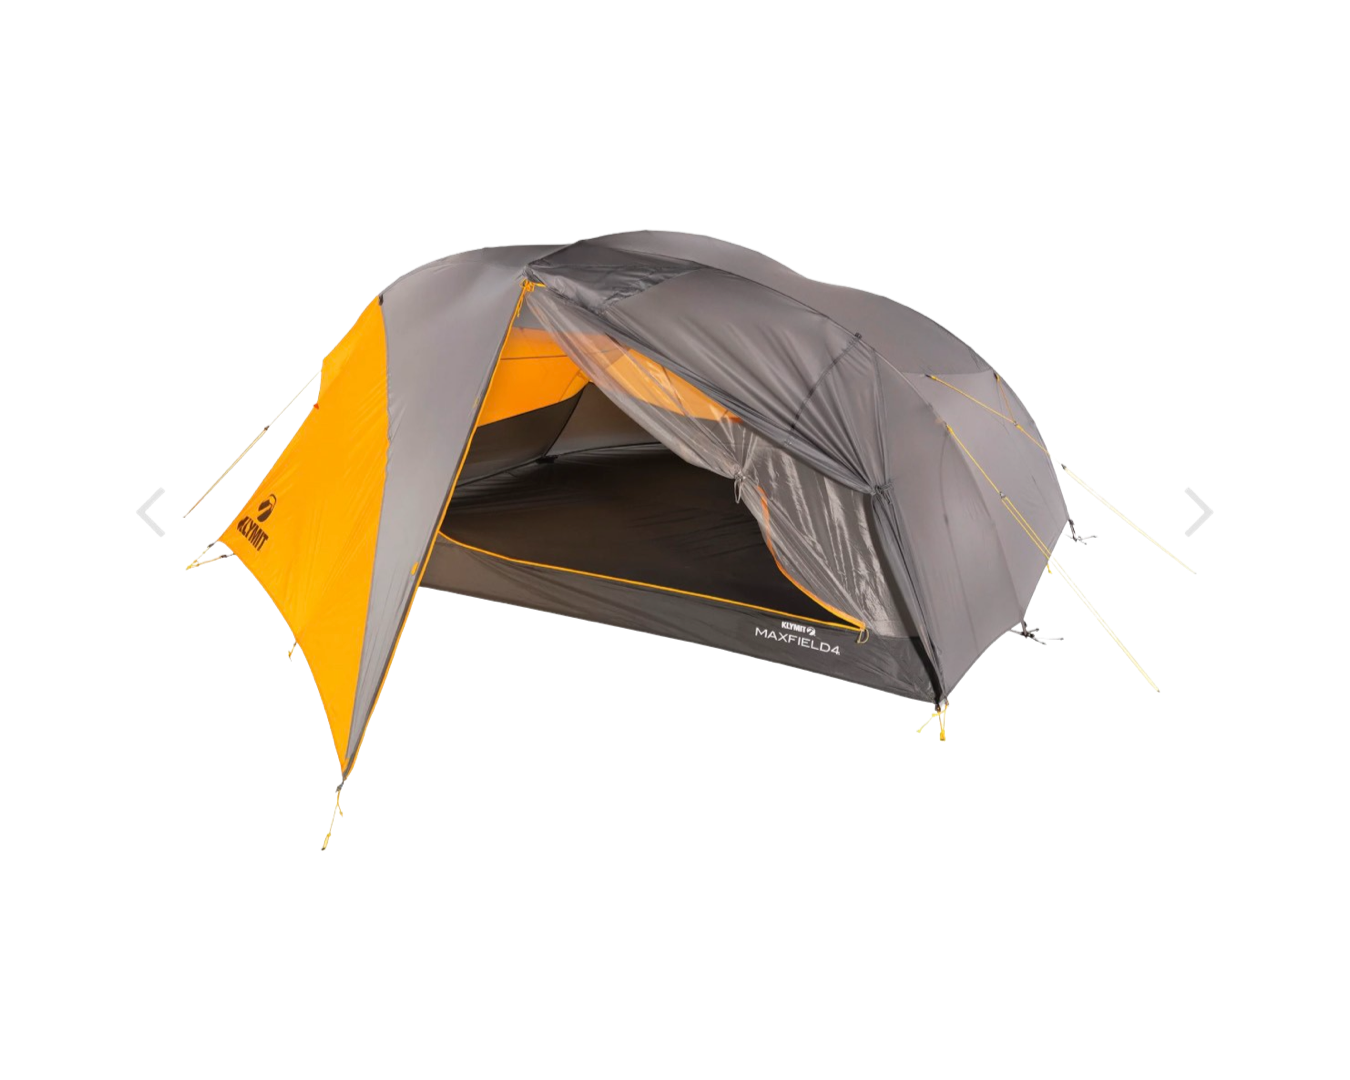 Underrated 4-Person Backpacking Tents